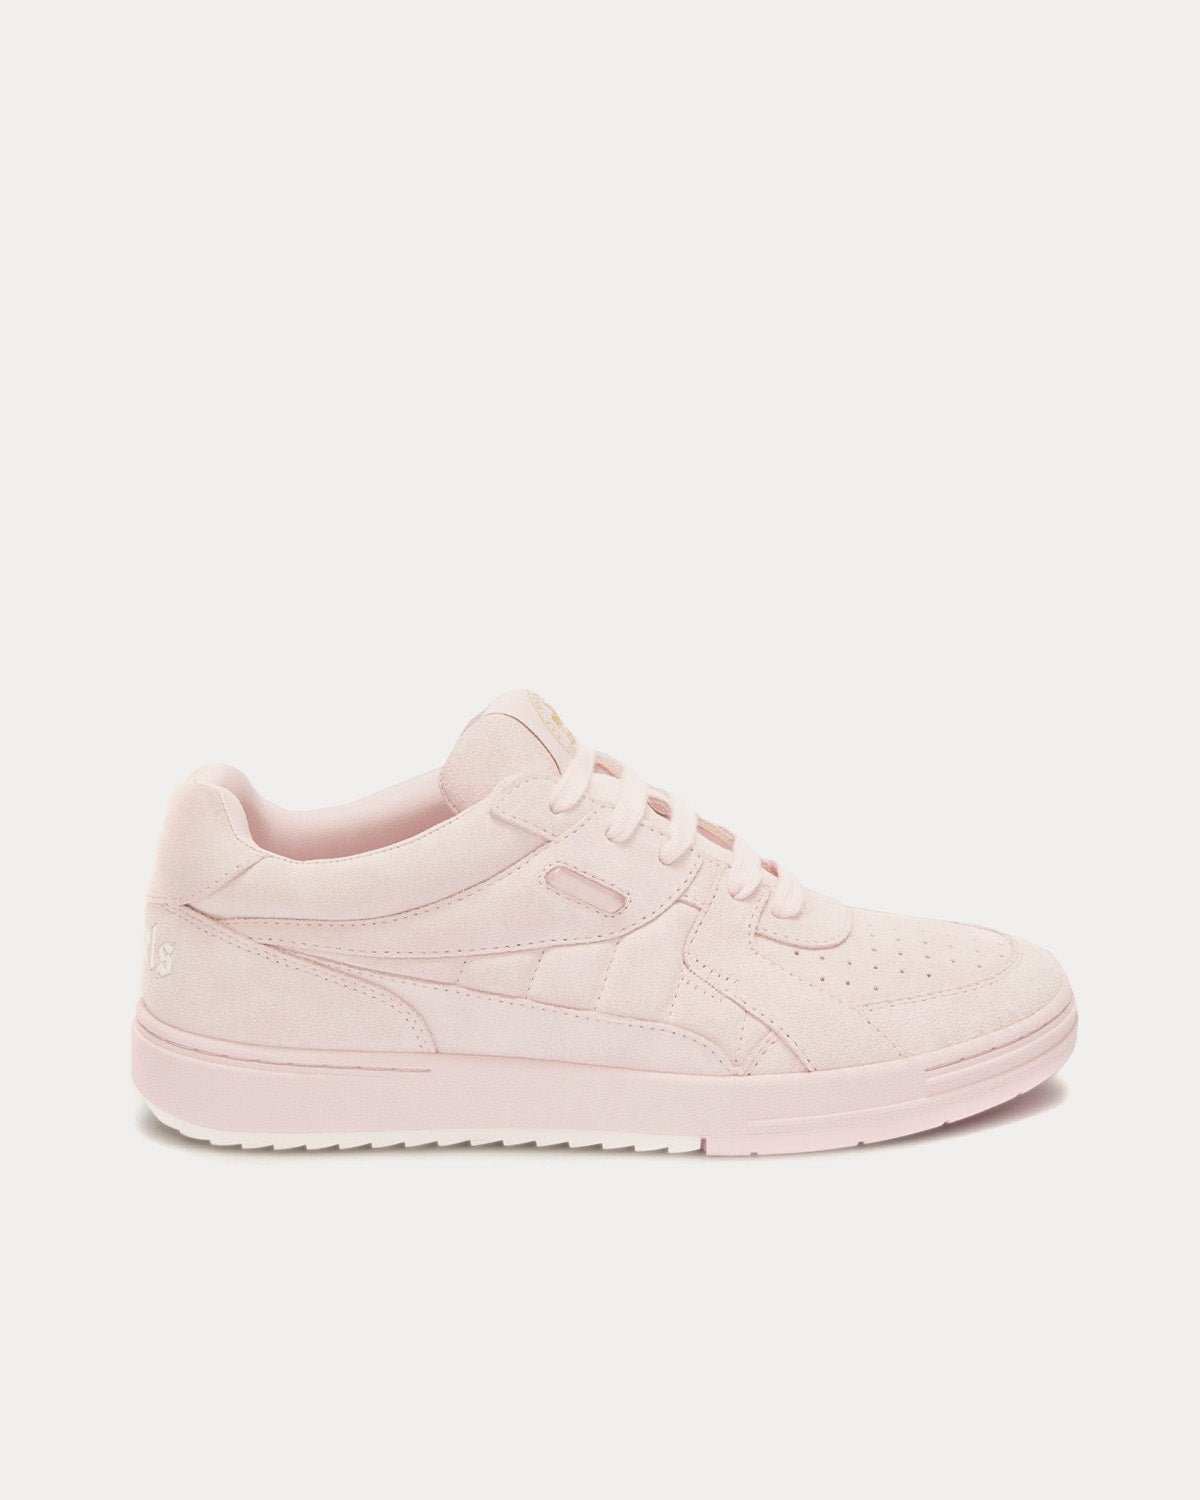 Palm Angels - University Pink / White Low Top Sneakers